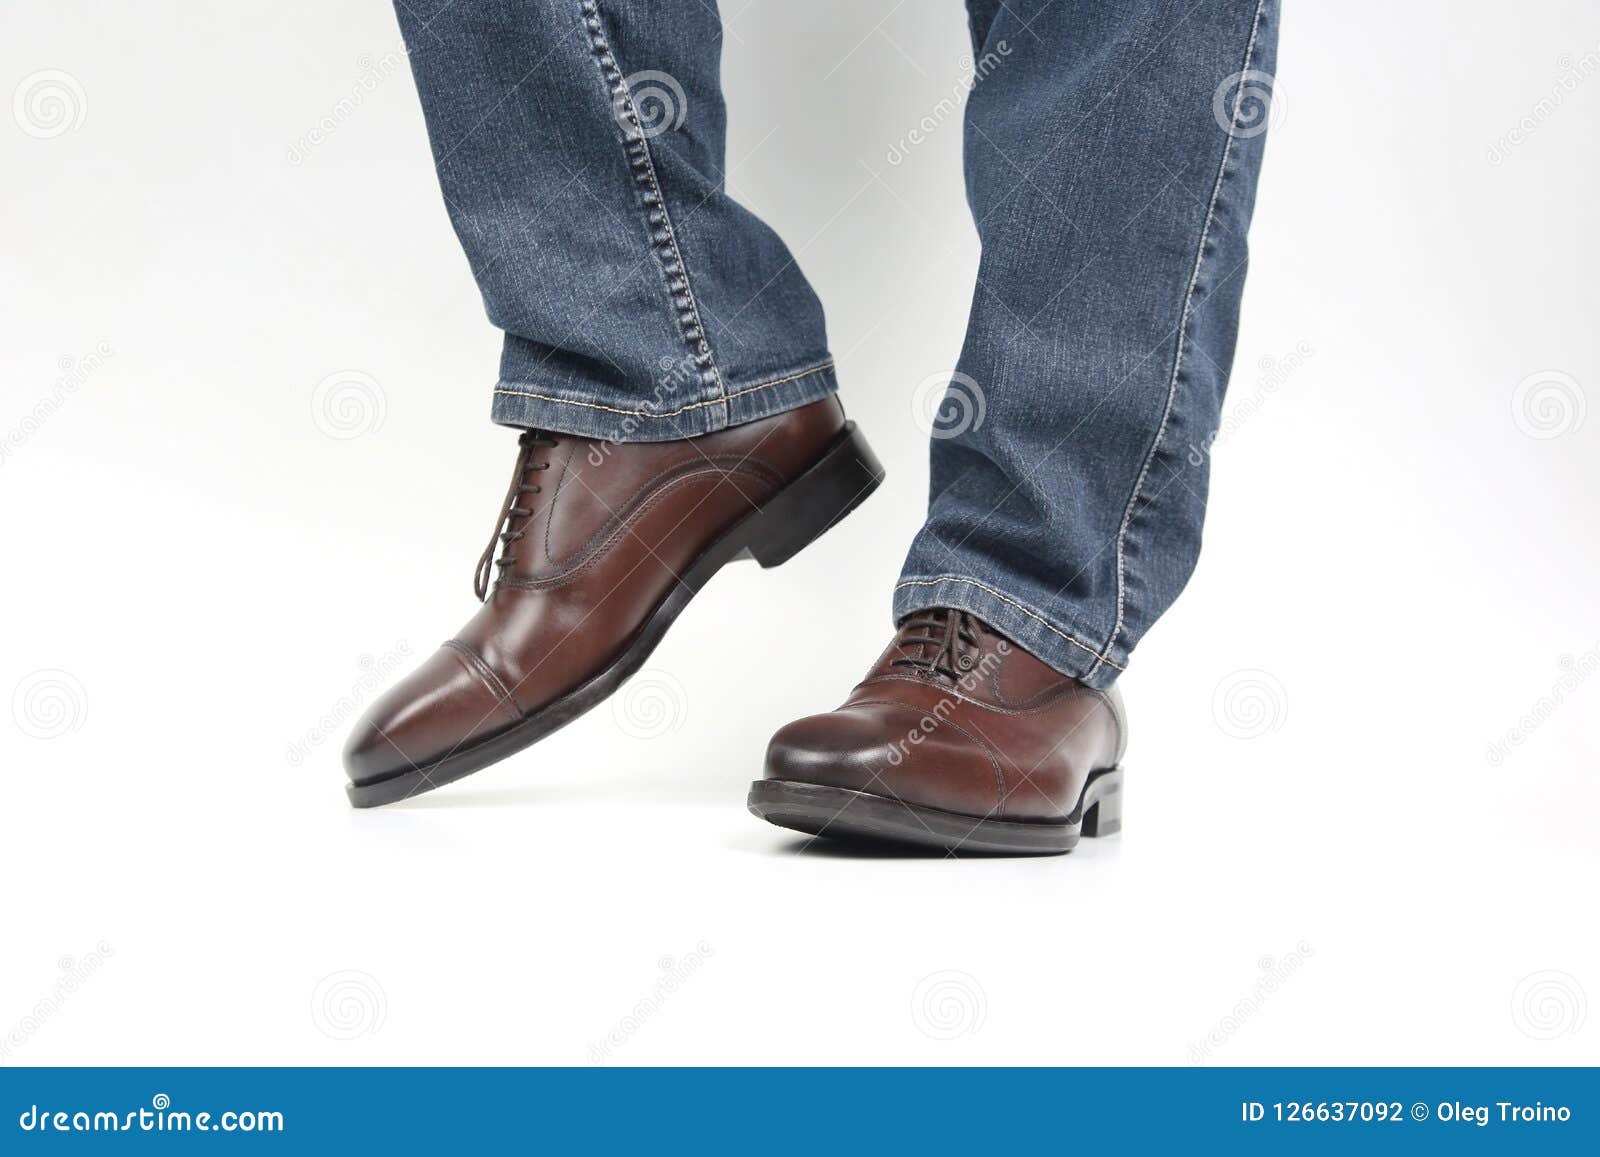 Men`s Legs in Jeans Shod in Classic Brown Oxford Shoes Stock Photo ...